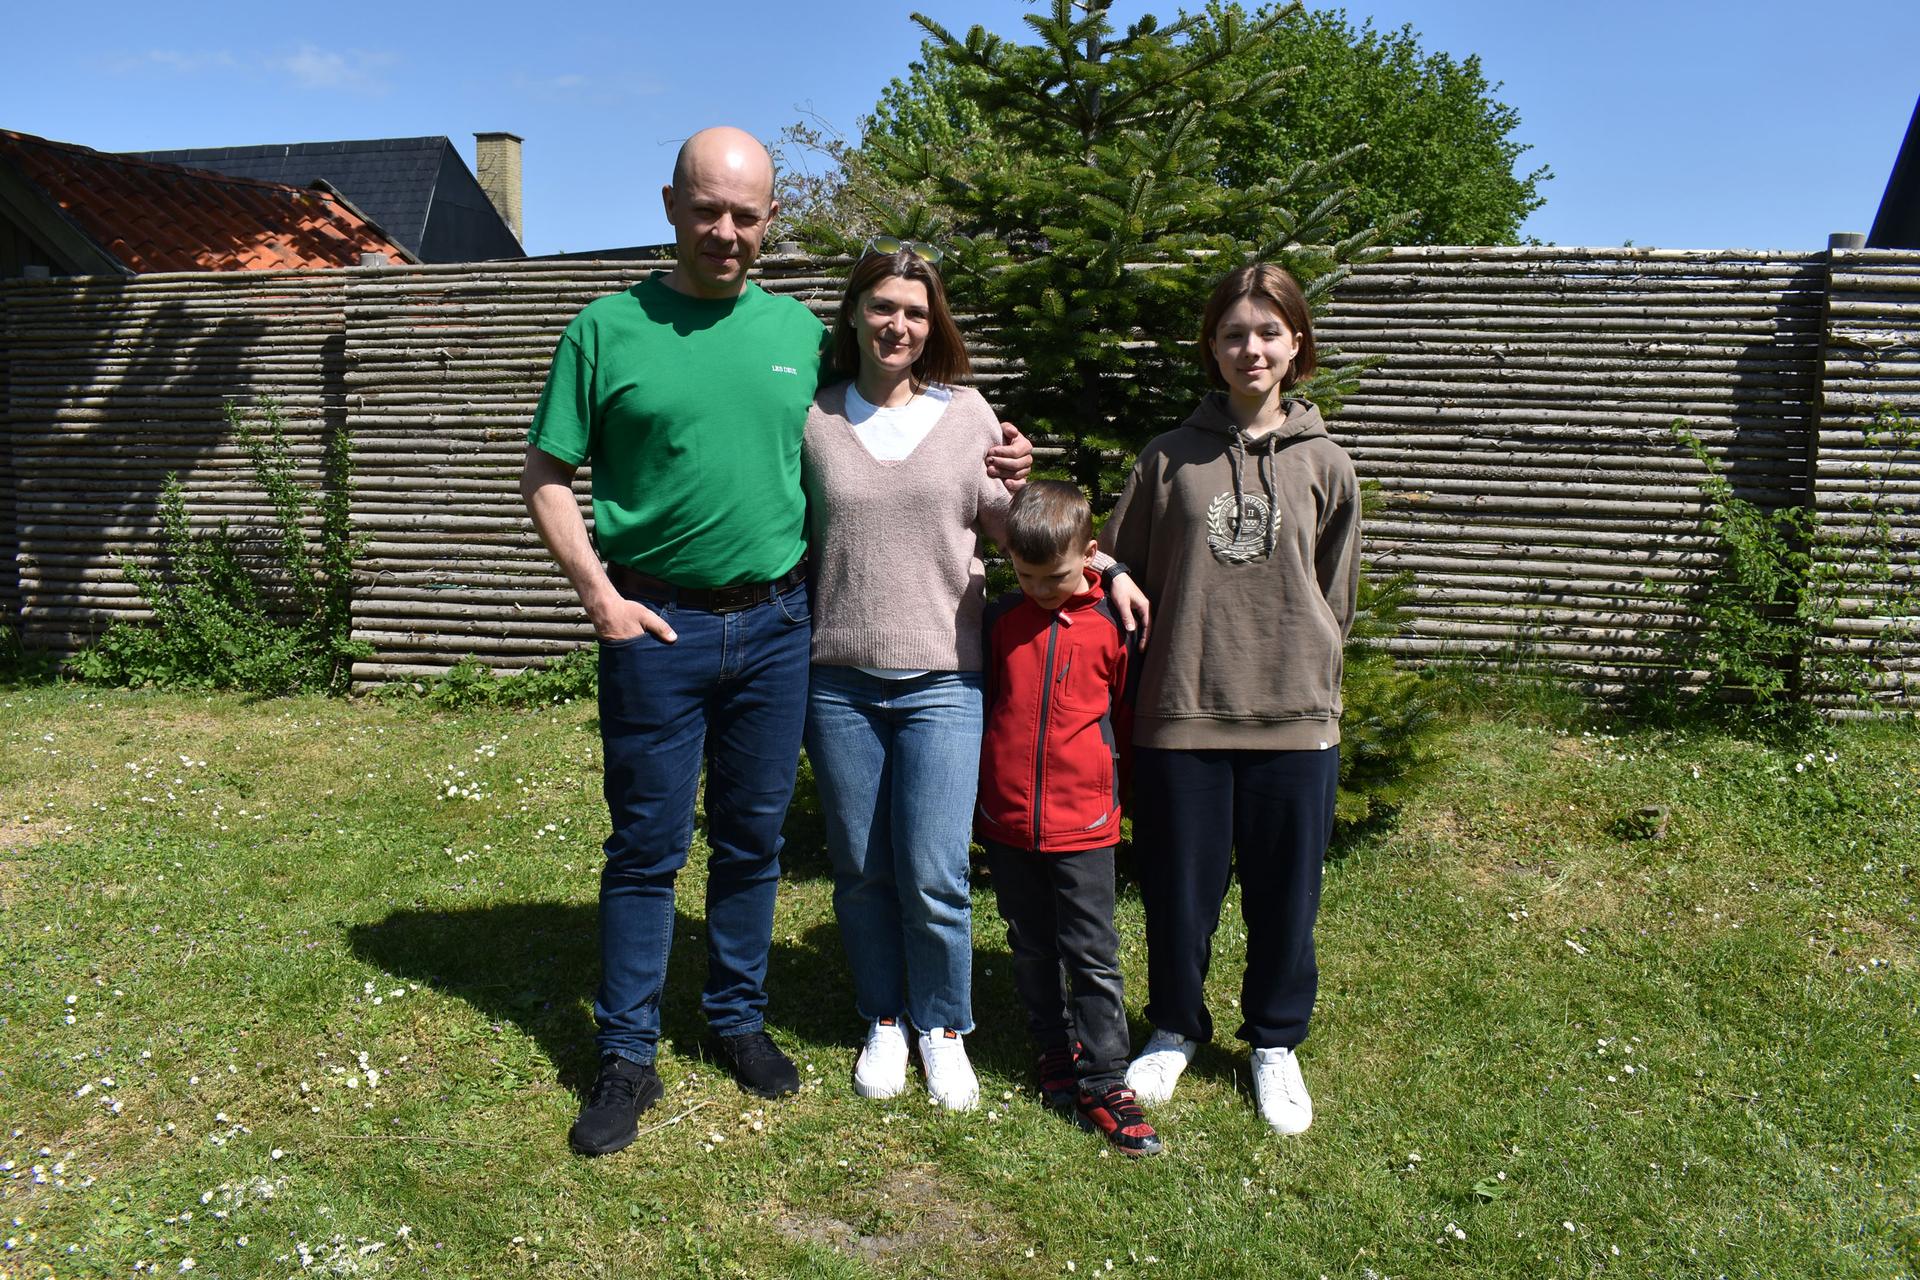 The Olinyk family poses for a portrait in the backyard in Hvidovre, Denmark, May 18, 2023.